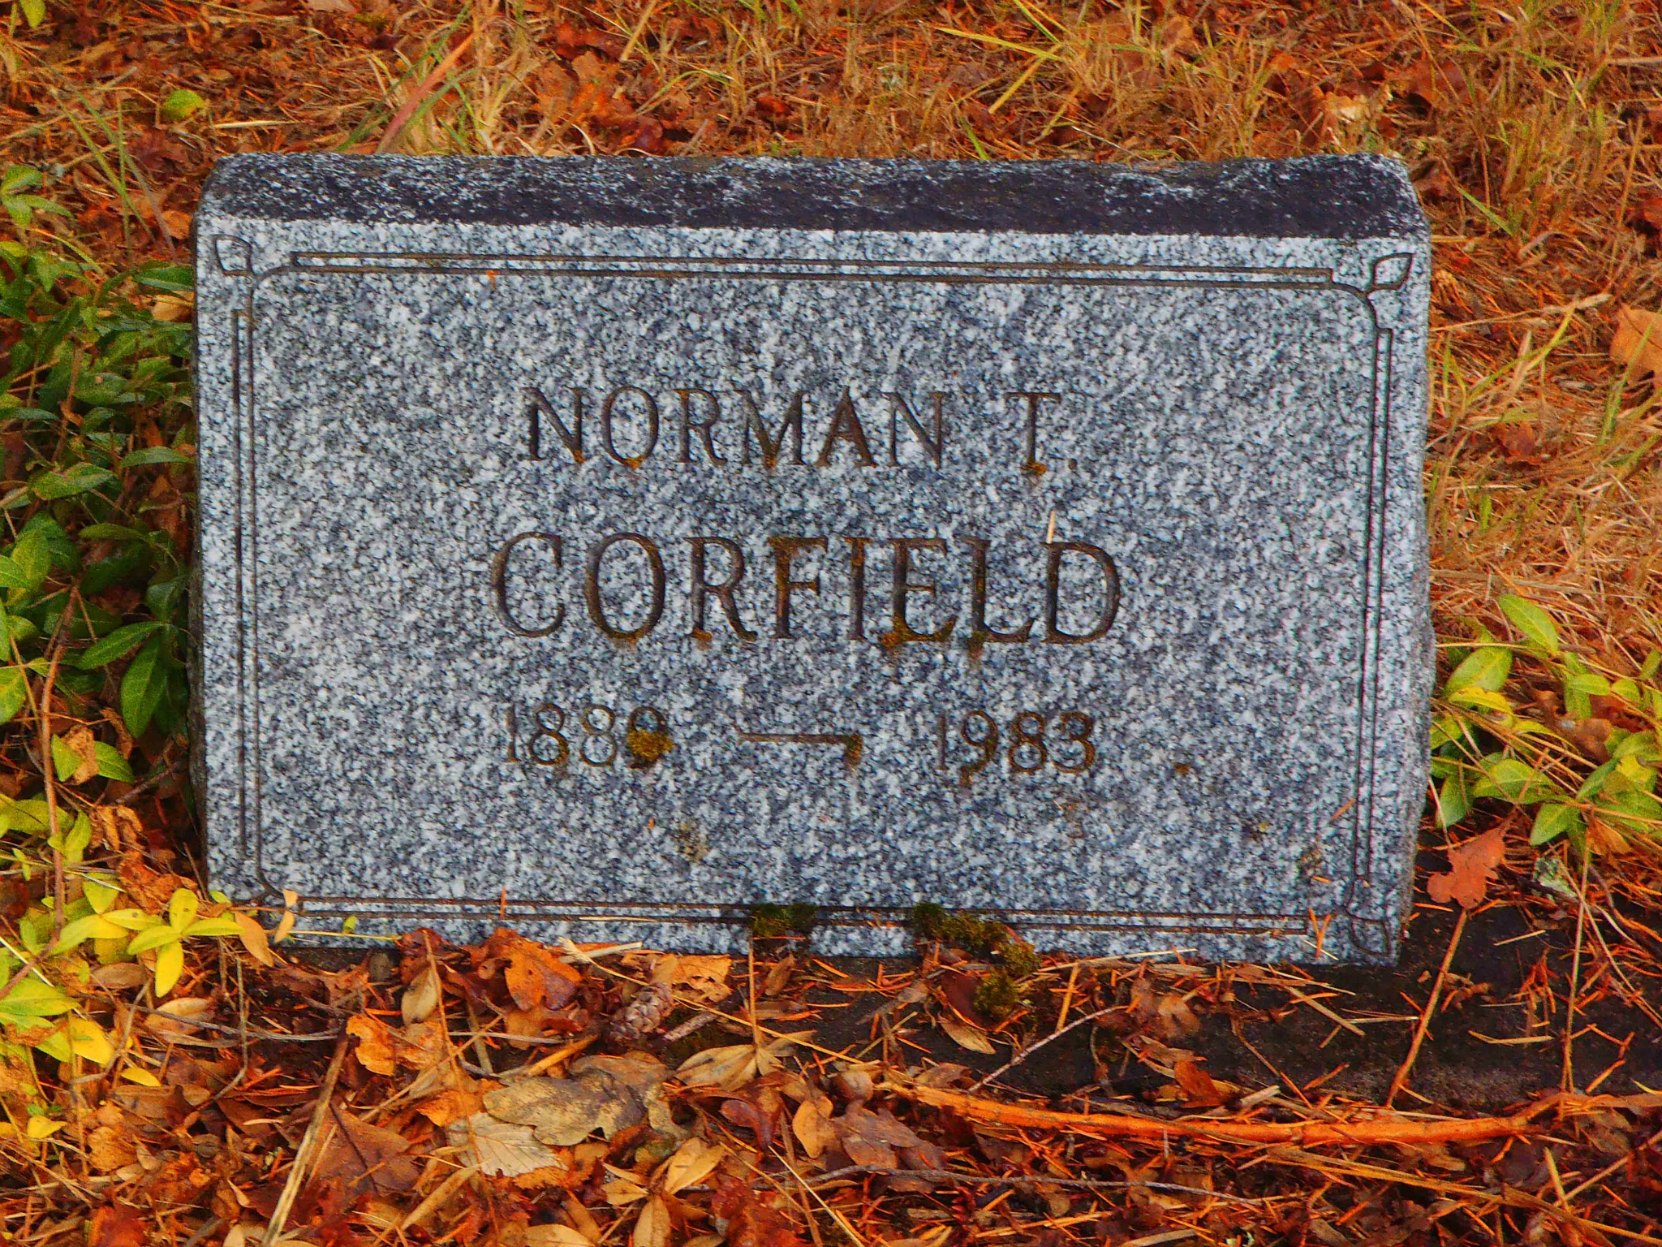 Norman Tressidor Corfield headstone. St. Peter's Quamichan Anglican cemetery, North Cowichan, B.C.